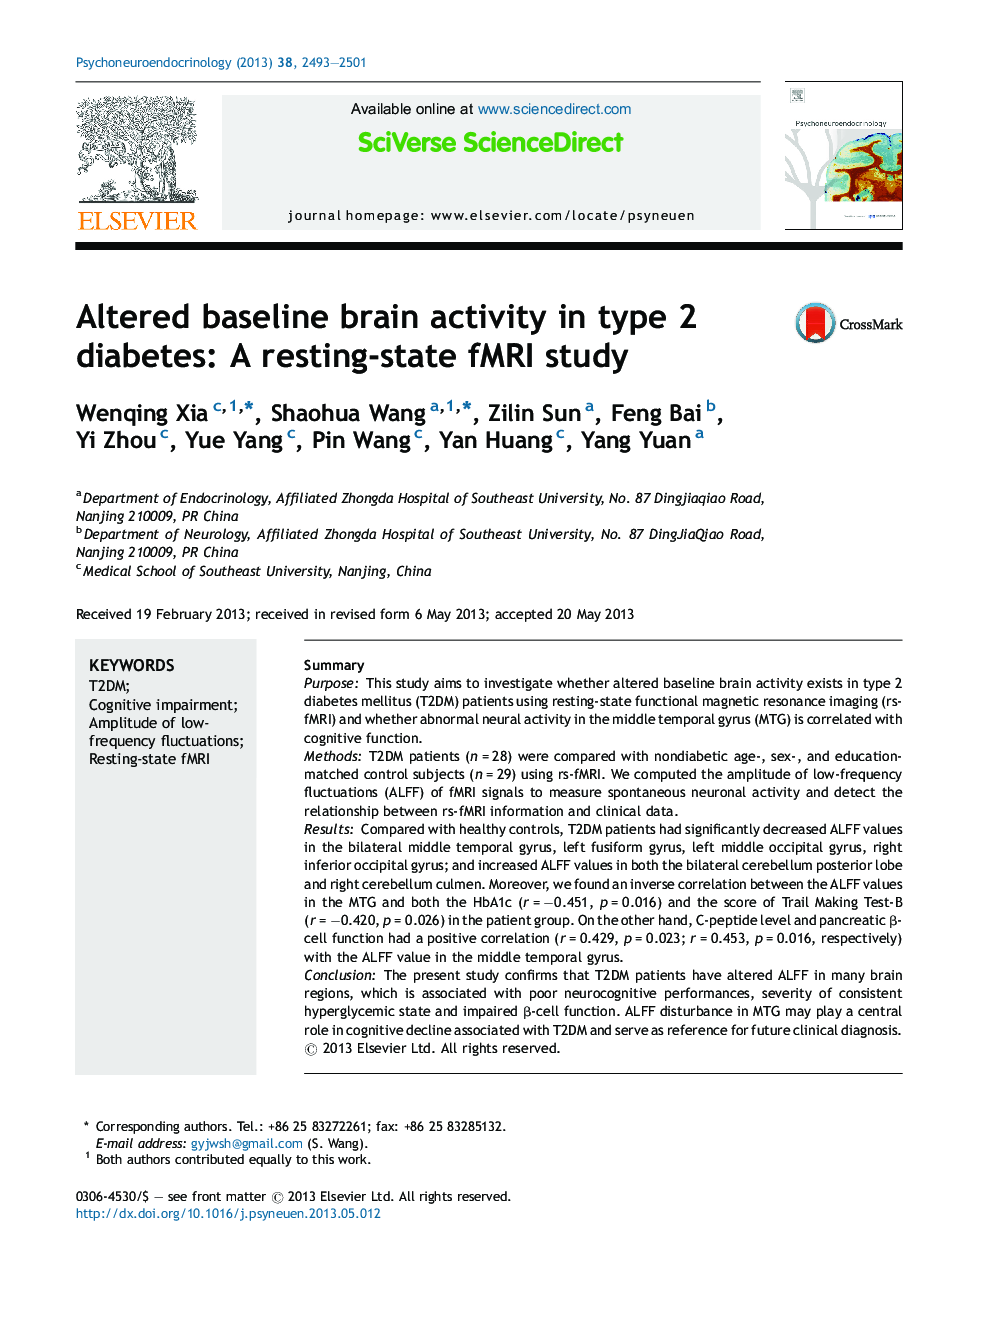 Altered baseline brain activity in type 2 diabetes: A resting-state fMRI study